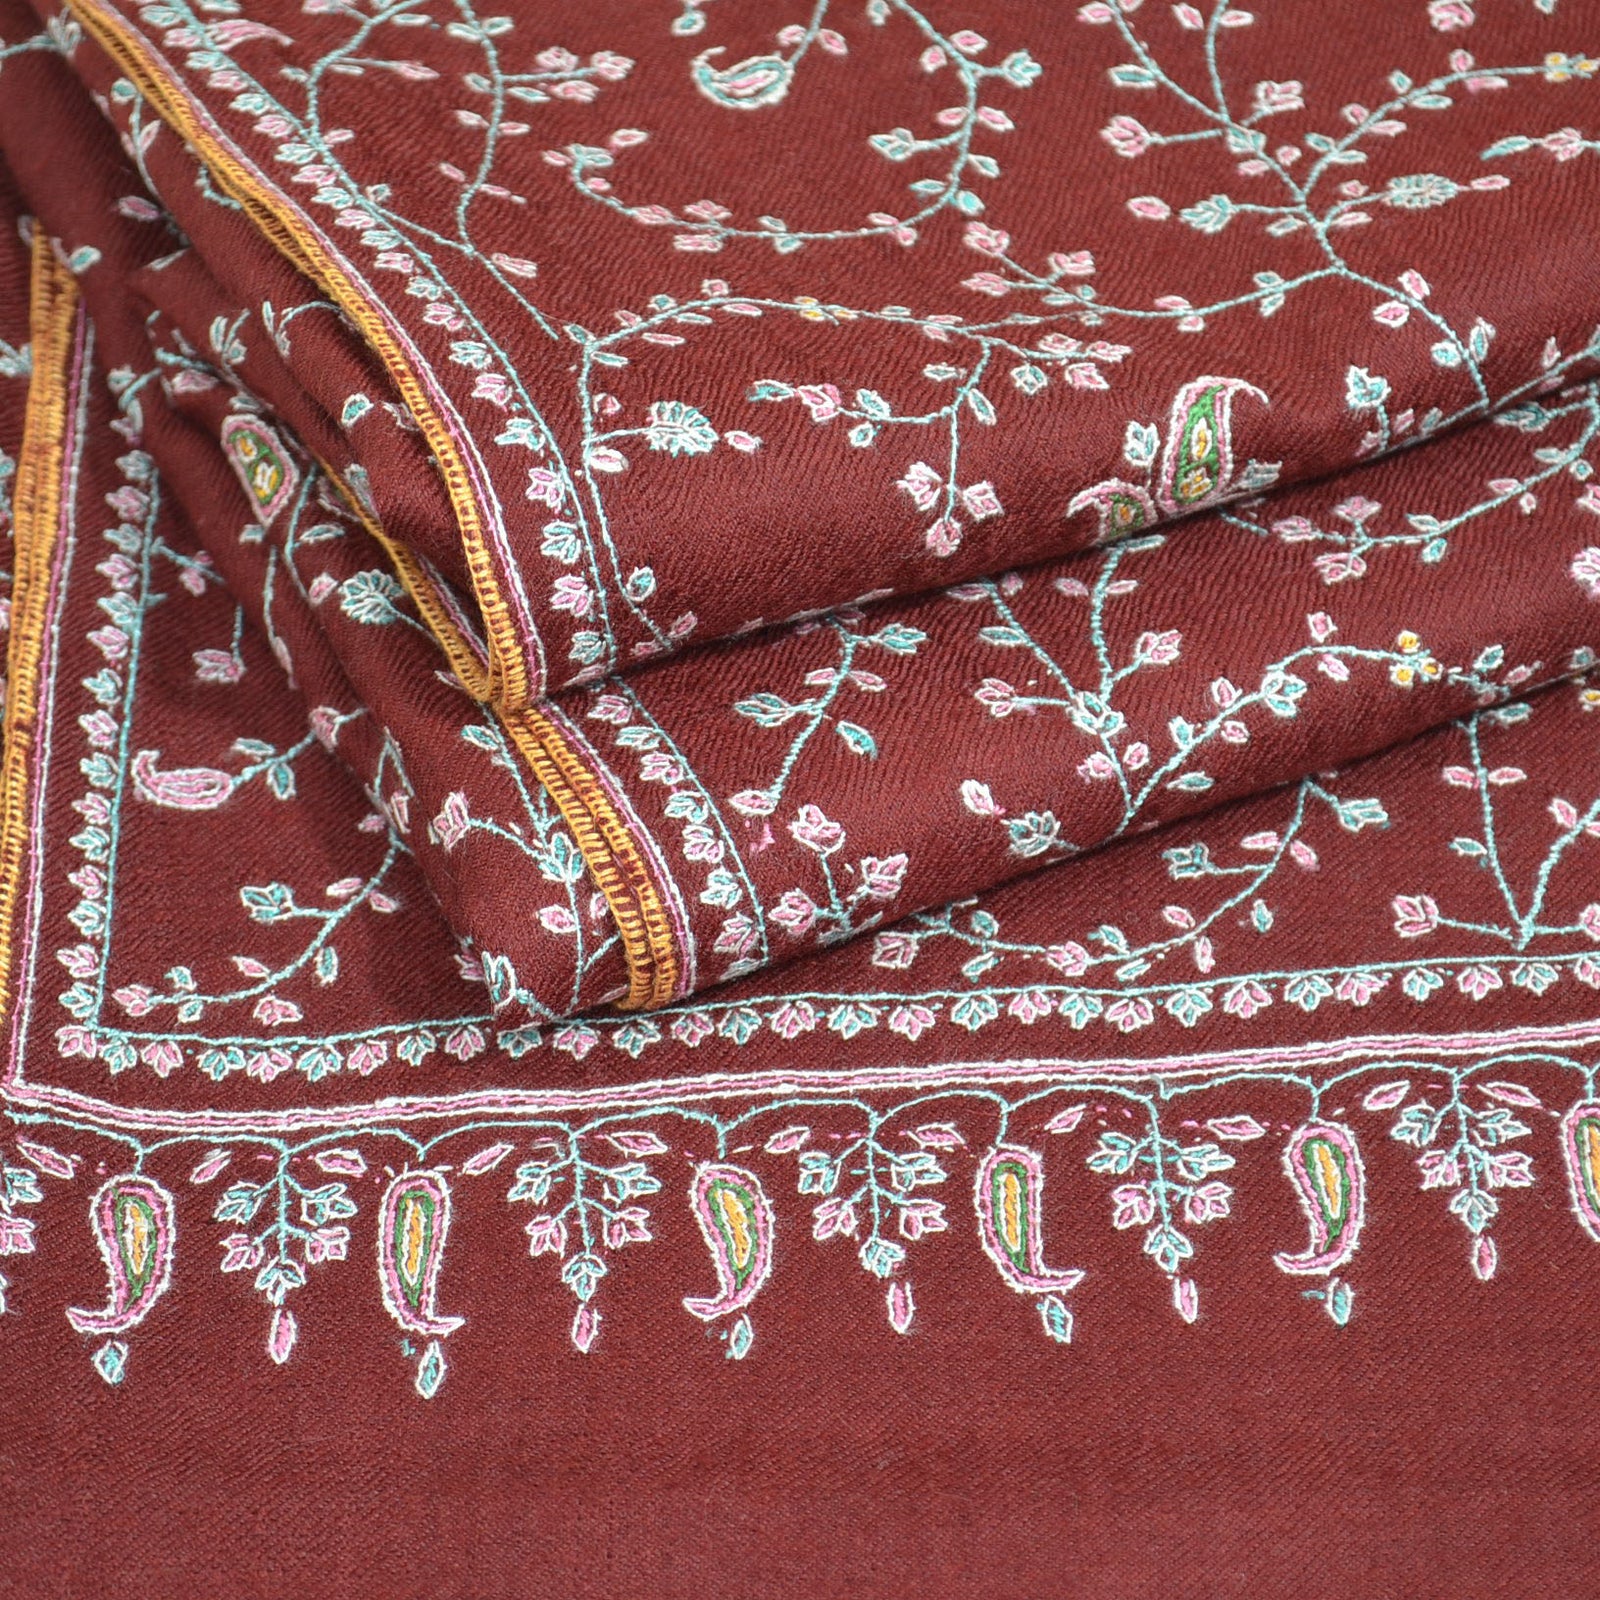 Maroon Jali Embroidery Cashmere Travel Wrap